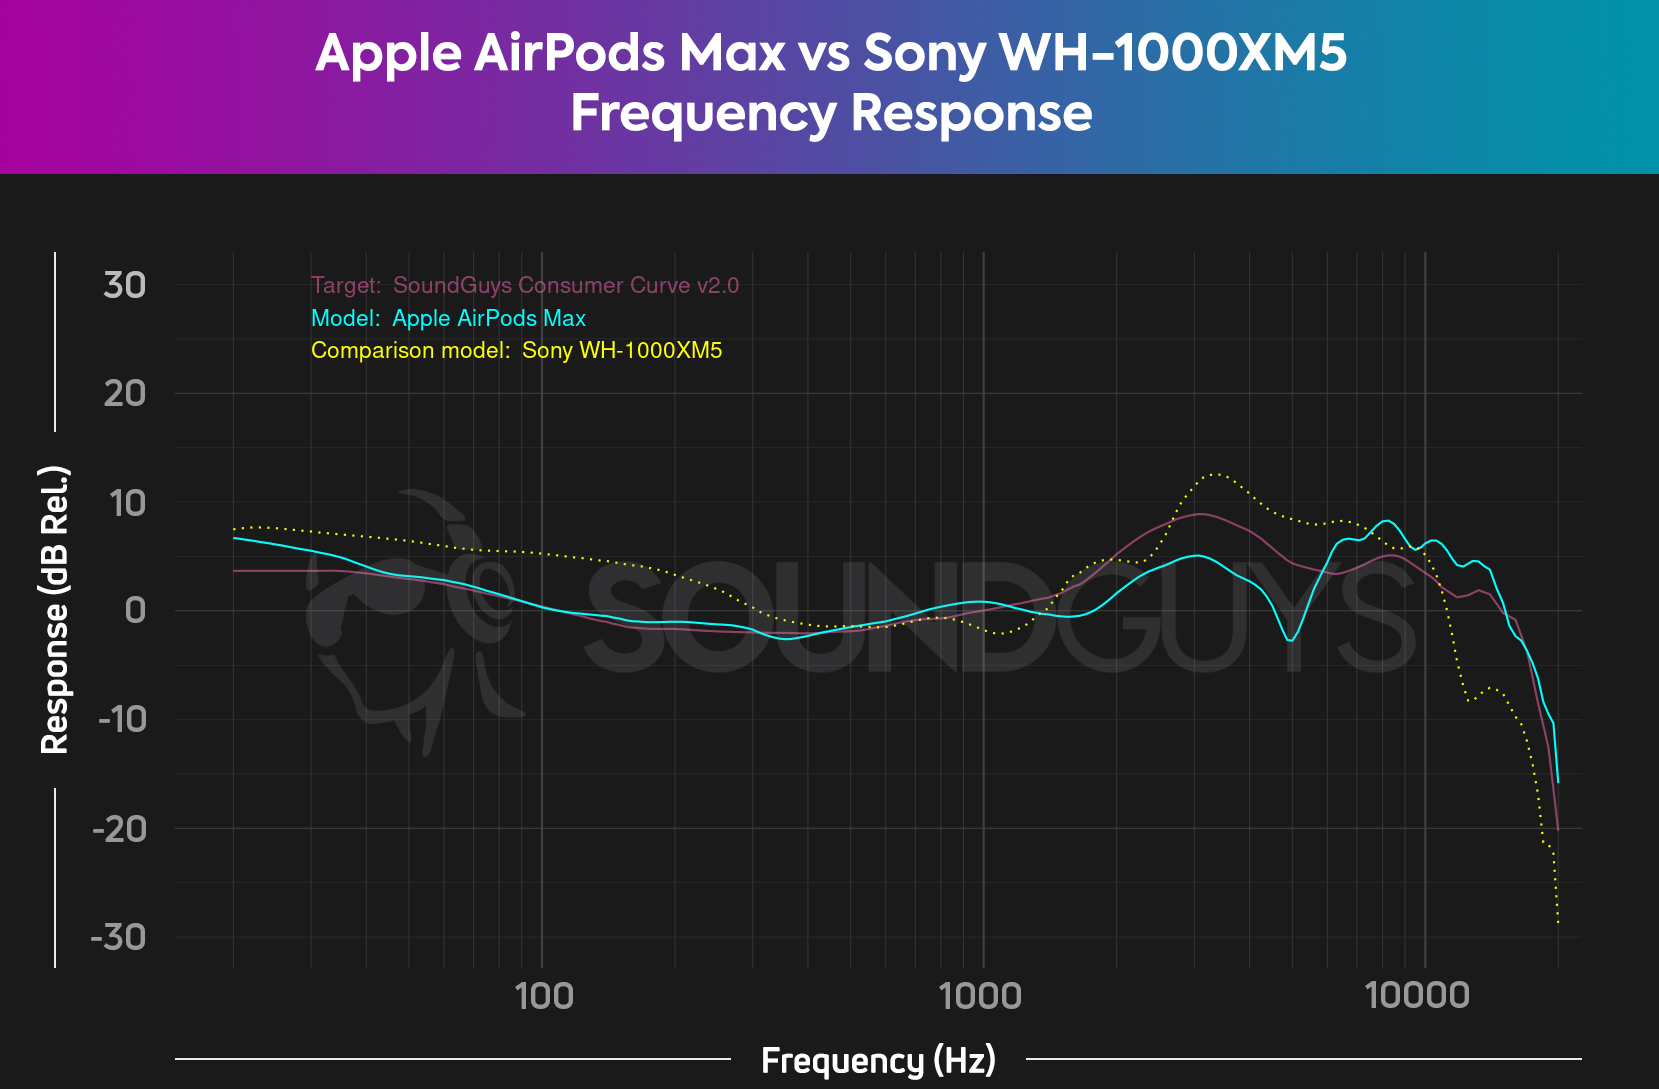 The frequency response comparison between the Sony WH-1000XM5 and the Apple AirPods Max.